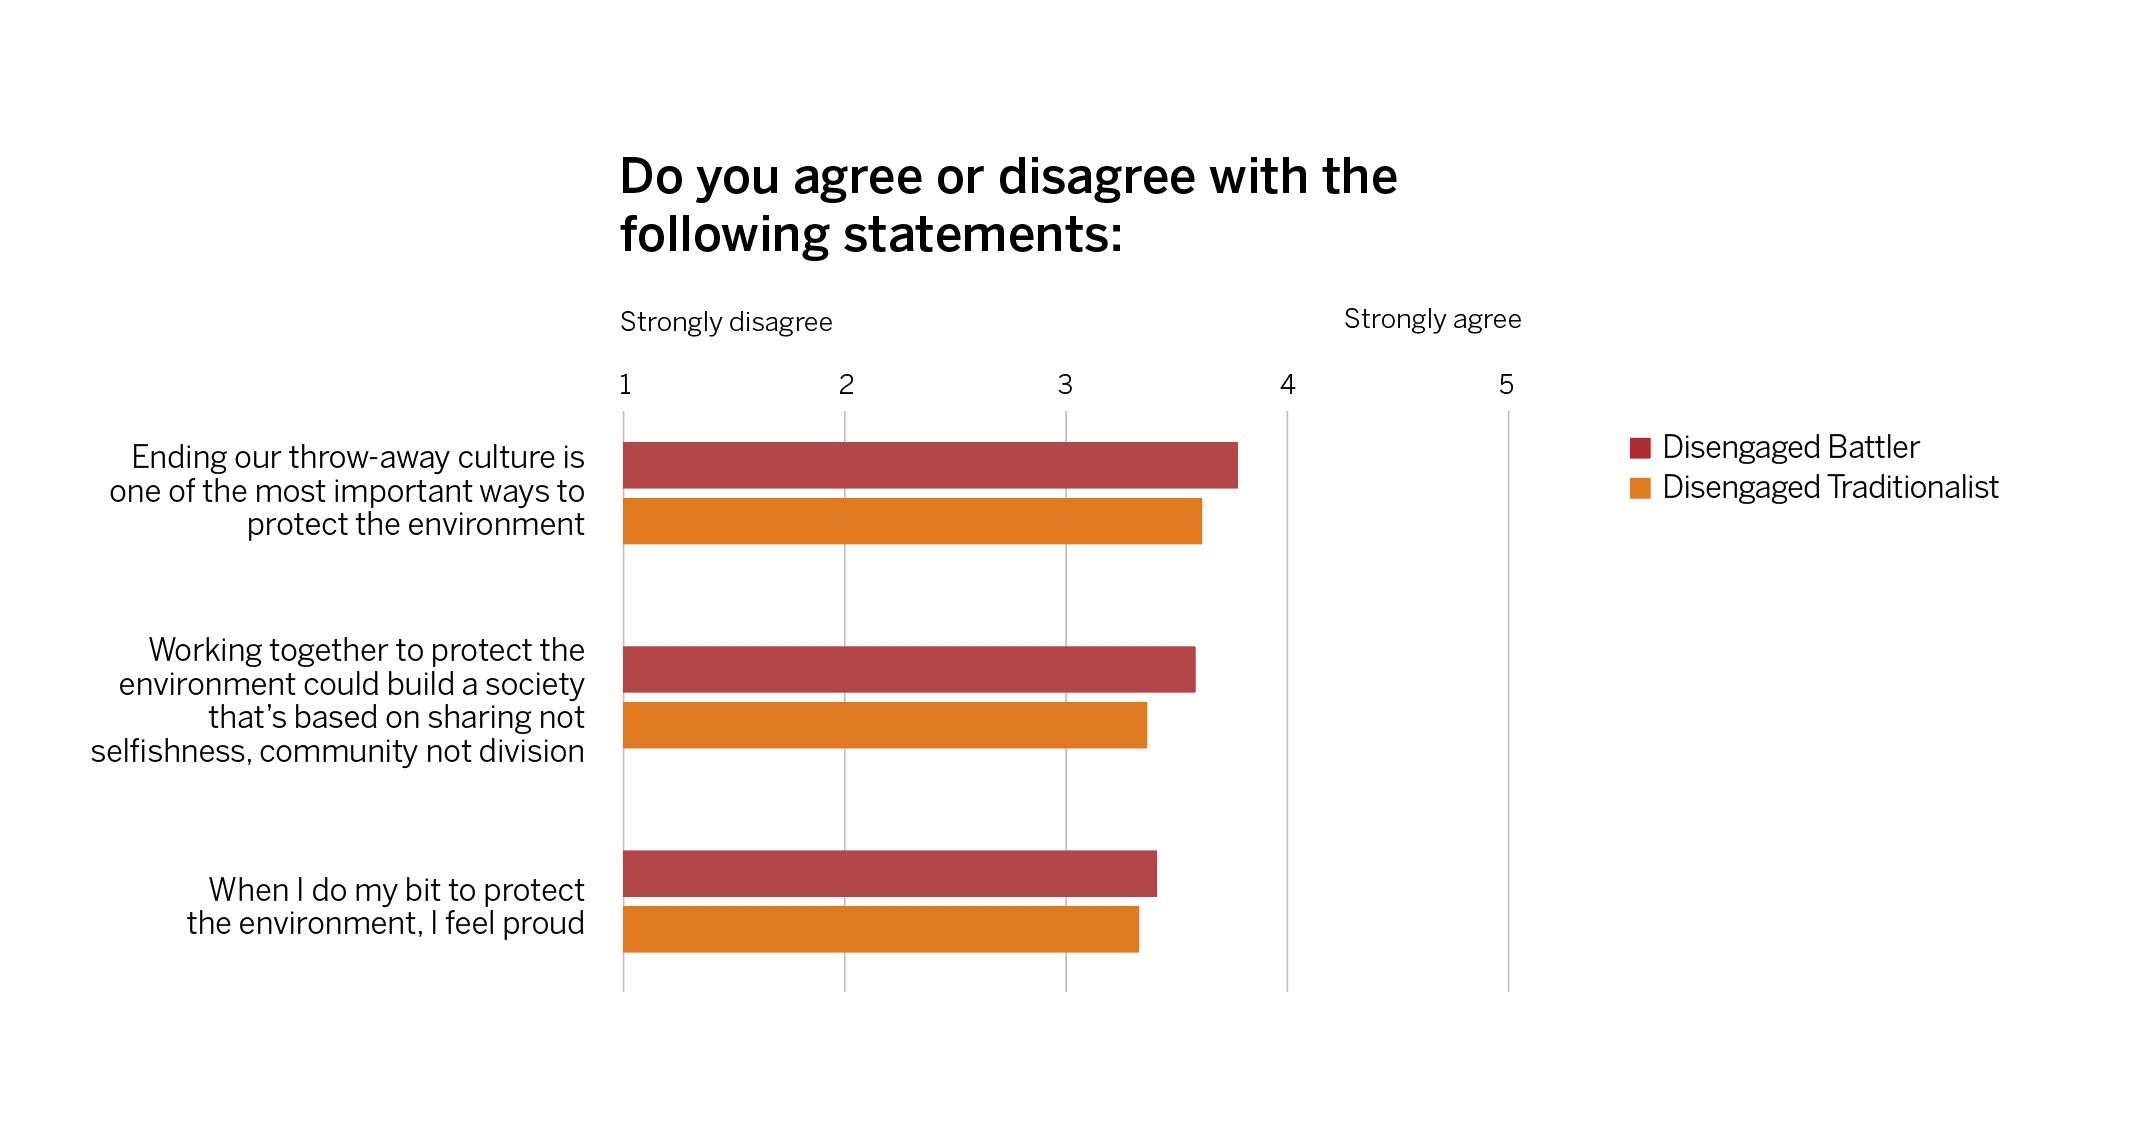 The two ‘Disengaged’ groups show lowest agreement with statements about pride, working together to protect the environment, and reducing waste